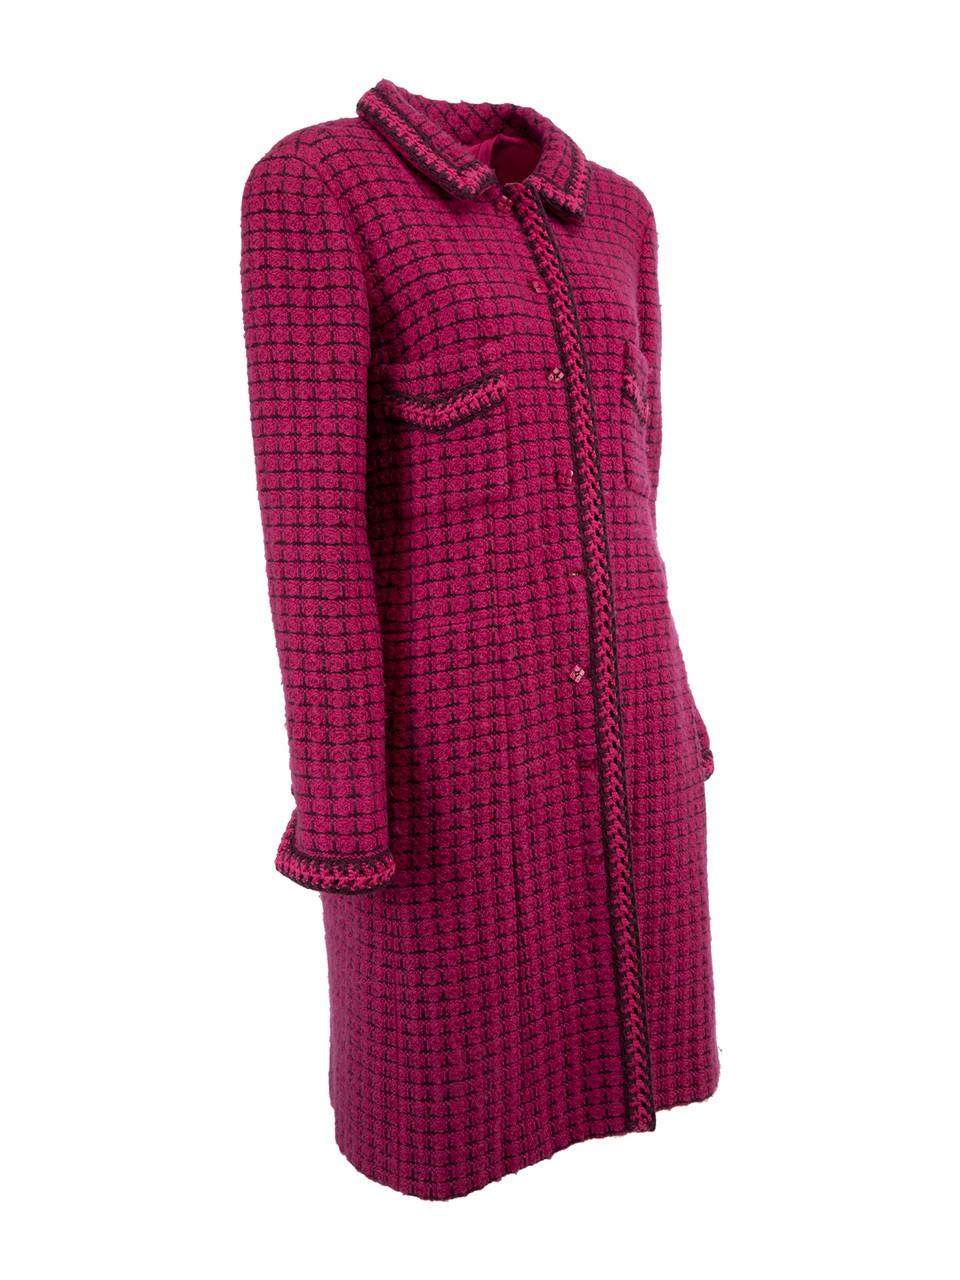 CONDITION is Very good. Minimal wear to coat is evident. Overall wear to outer fabric where pilling and loose fabric can be seen on this used Chanel designer resale item.   Details  Magenta/ Violet Wool Long sleeves Straight collar Gingham Crochet